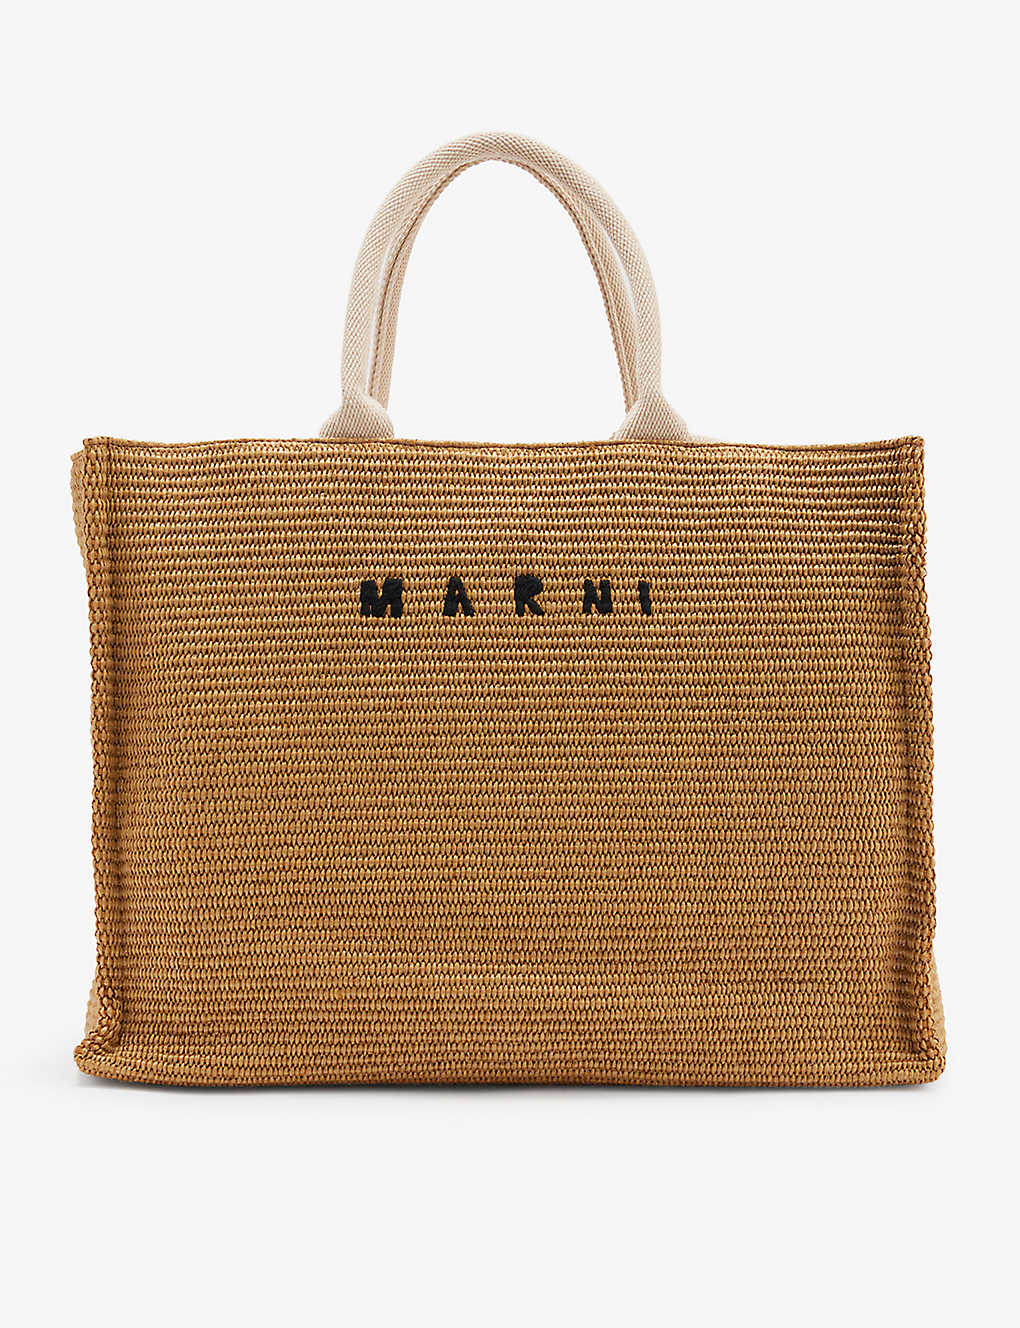 Marni East West Large Straw Tote Bag In Raw Sienna/ Natural